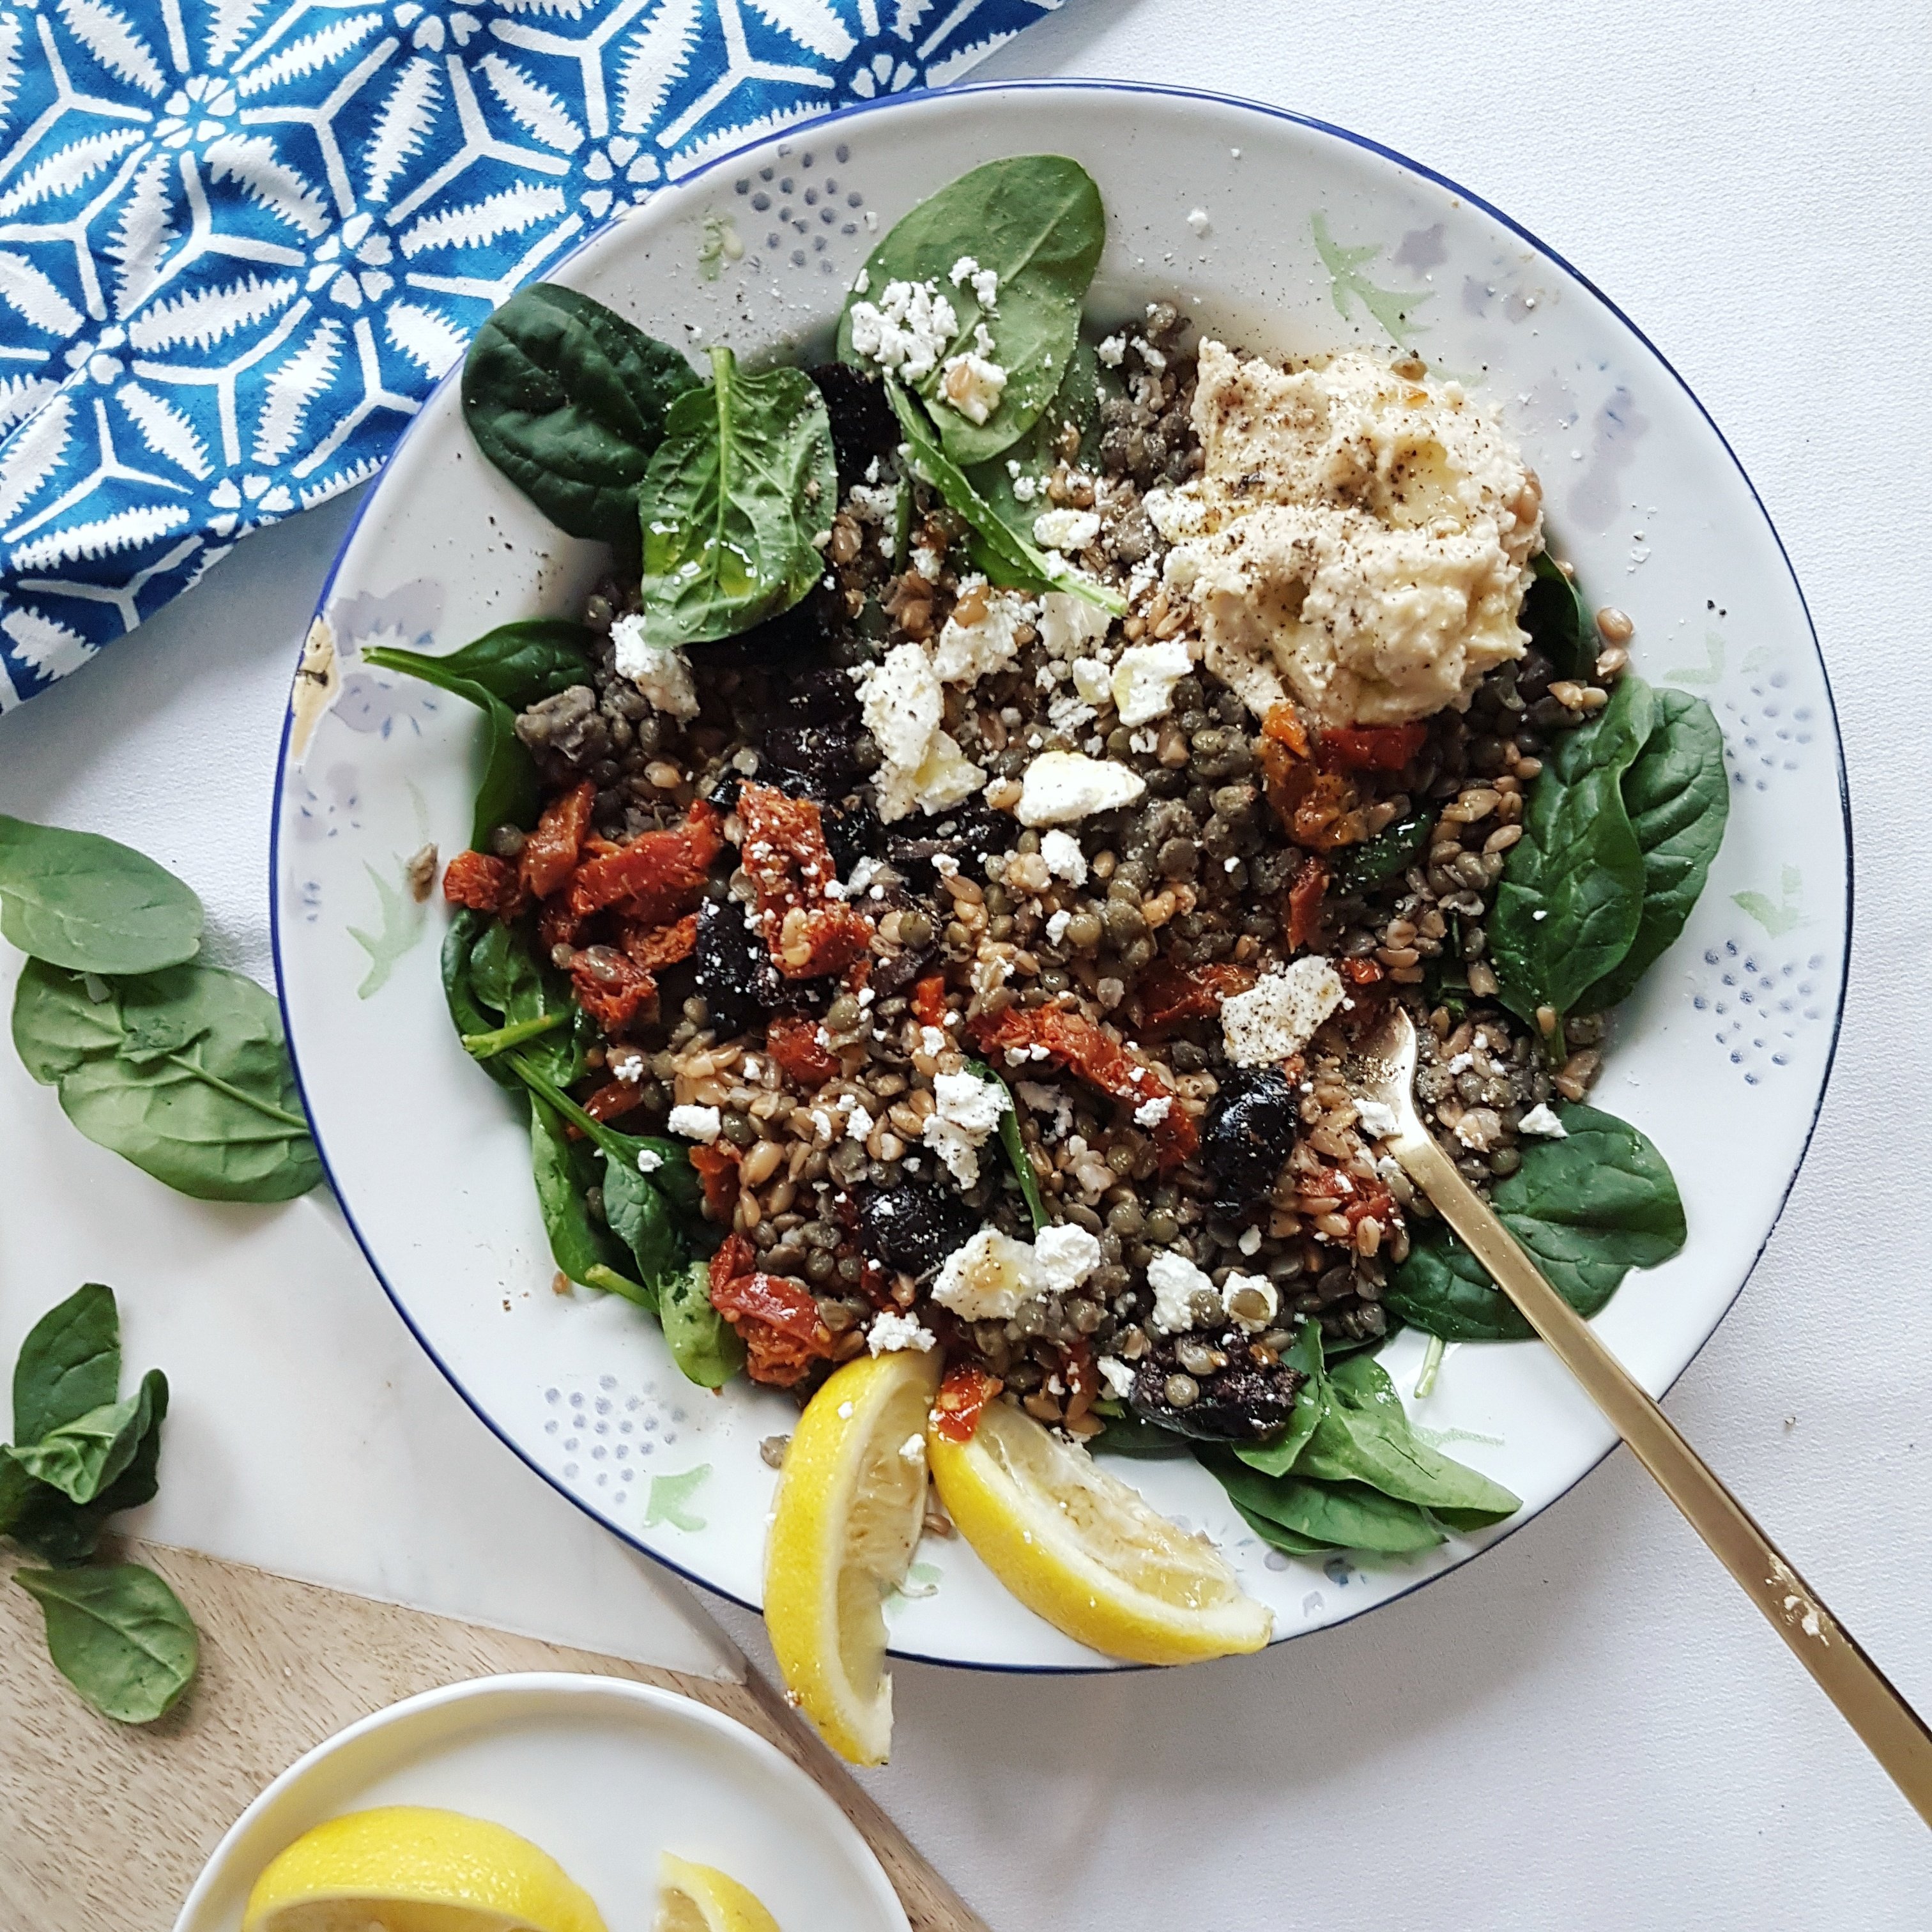 Mediterranean Farro and Green Lentil GRAIN Bowl with Feta, Olives and Sundried Tomatoes